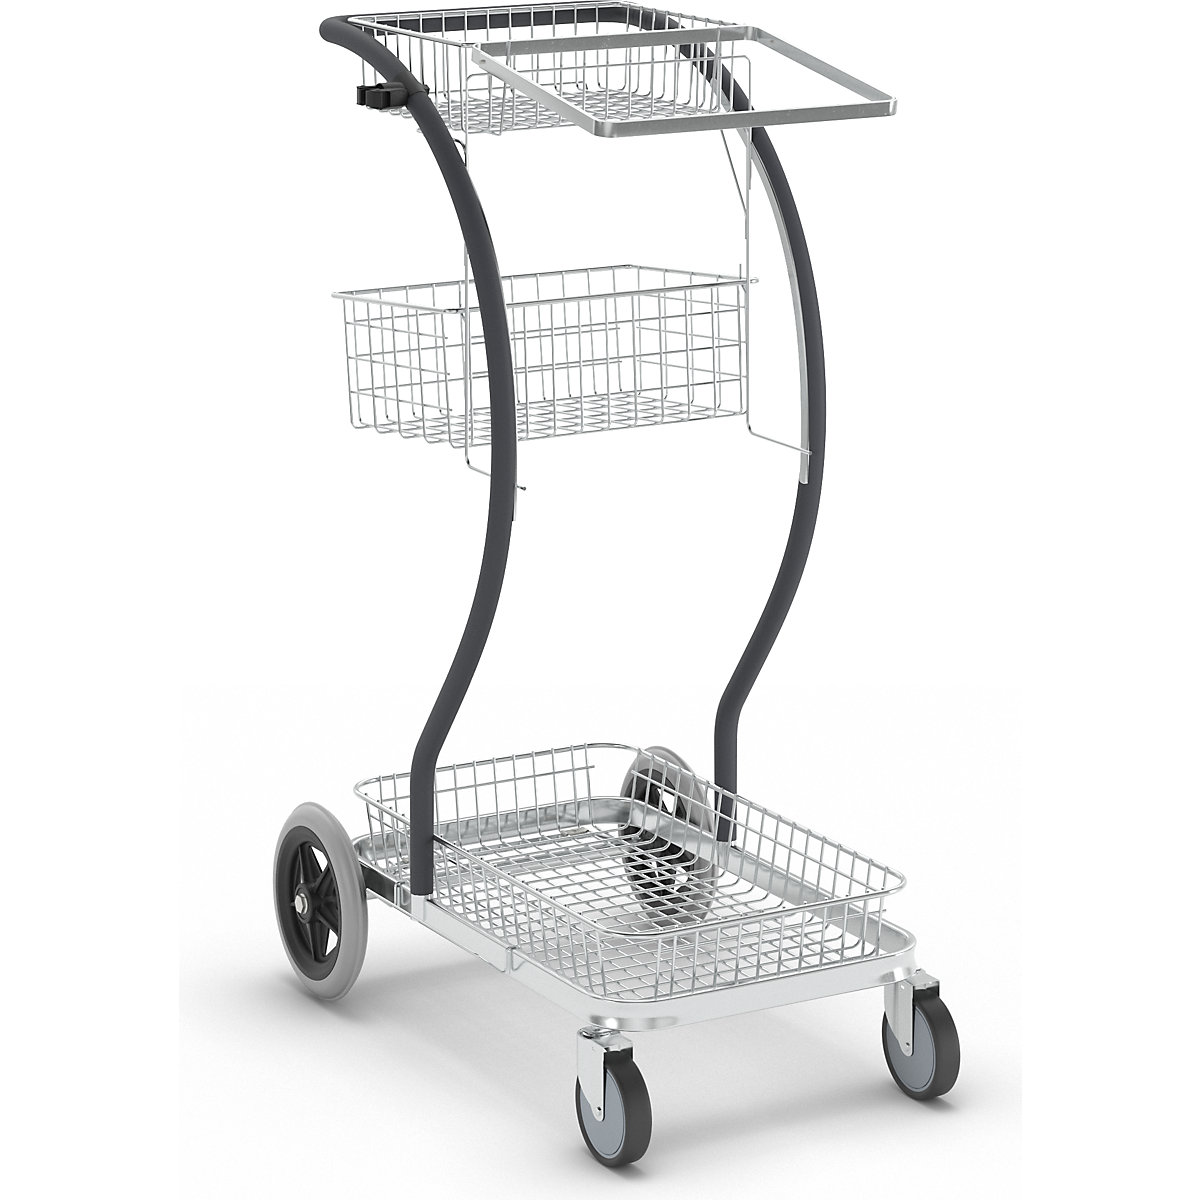 C-LINE platform and cleaning trolley – Kongamek